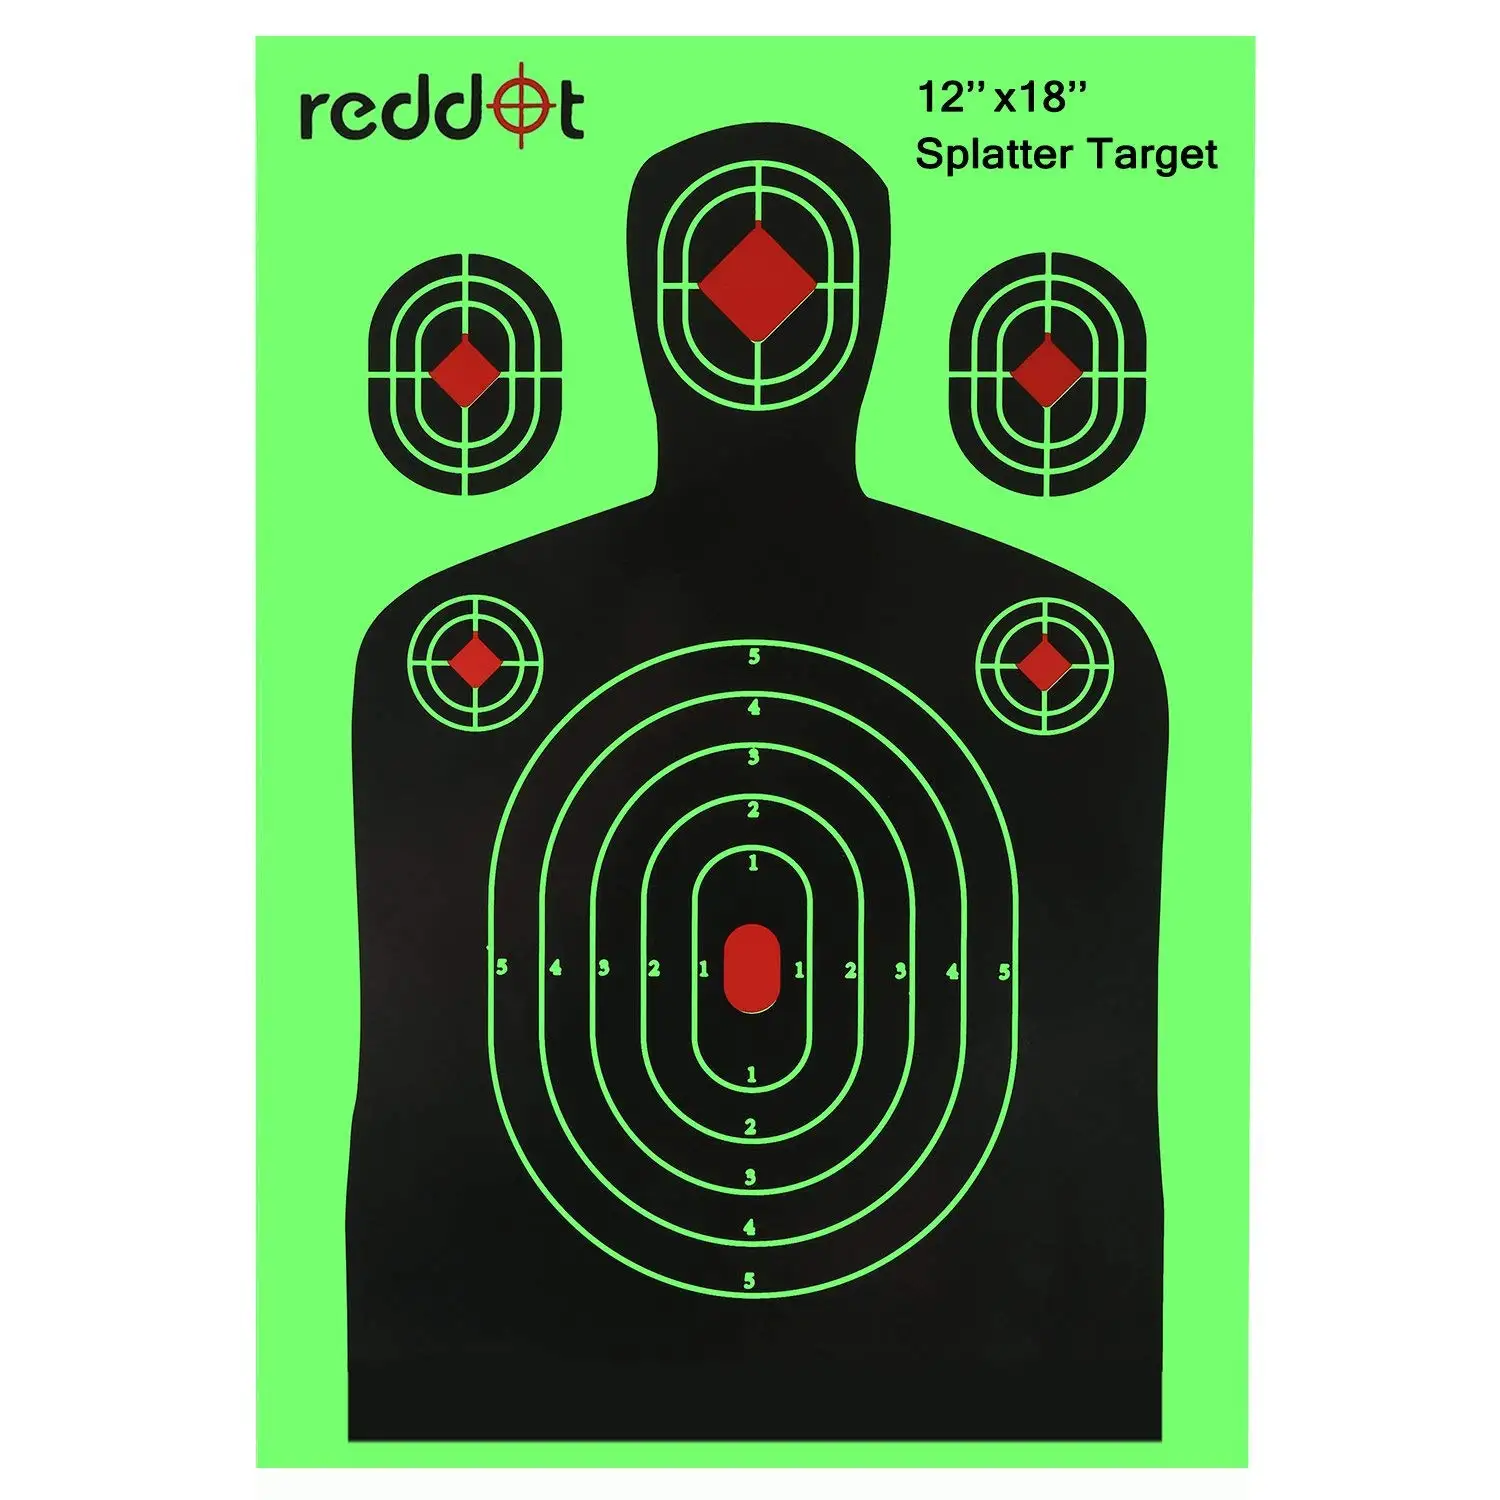 Air Rifle Pistol Gun Bb Airsoft Shooting Practise Targets Card Paper 14 And 17cm Targets Sporting